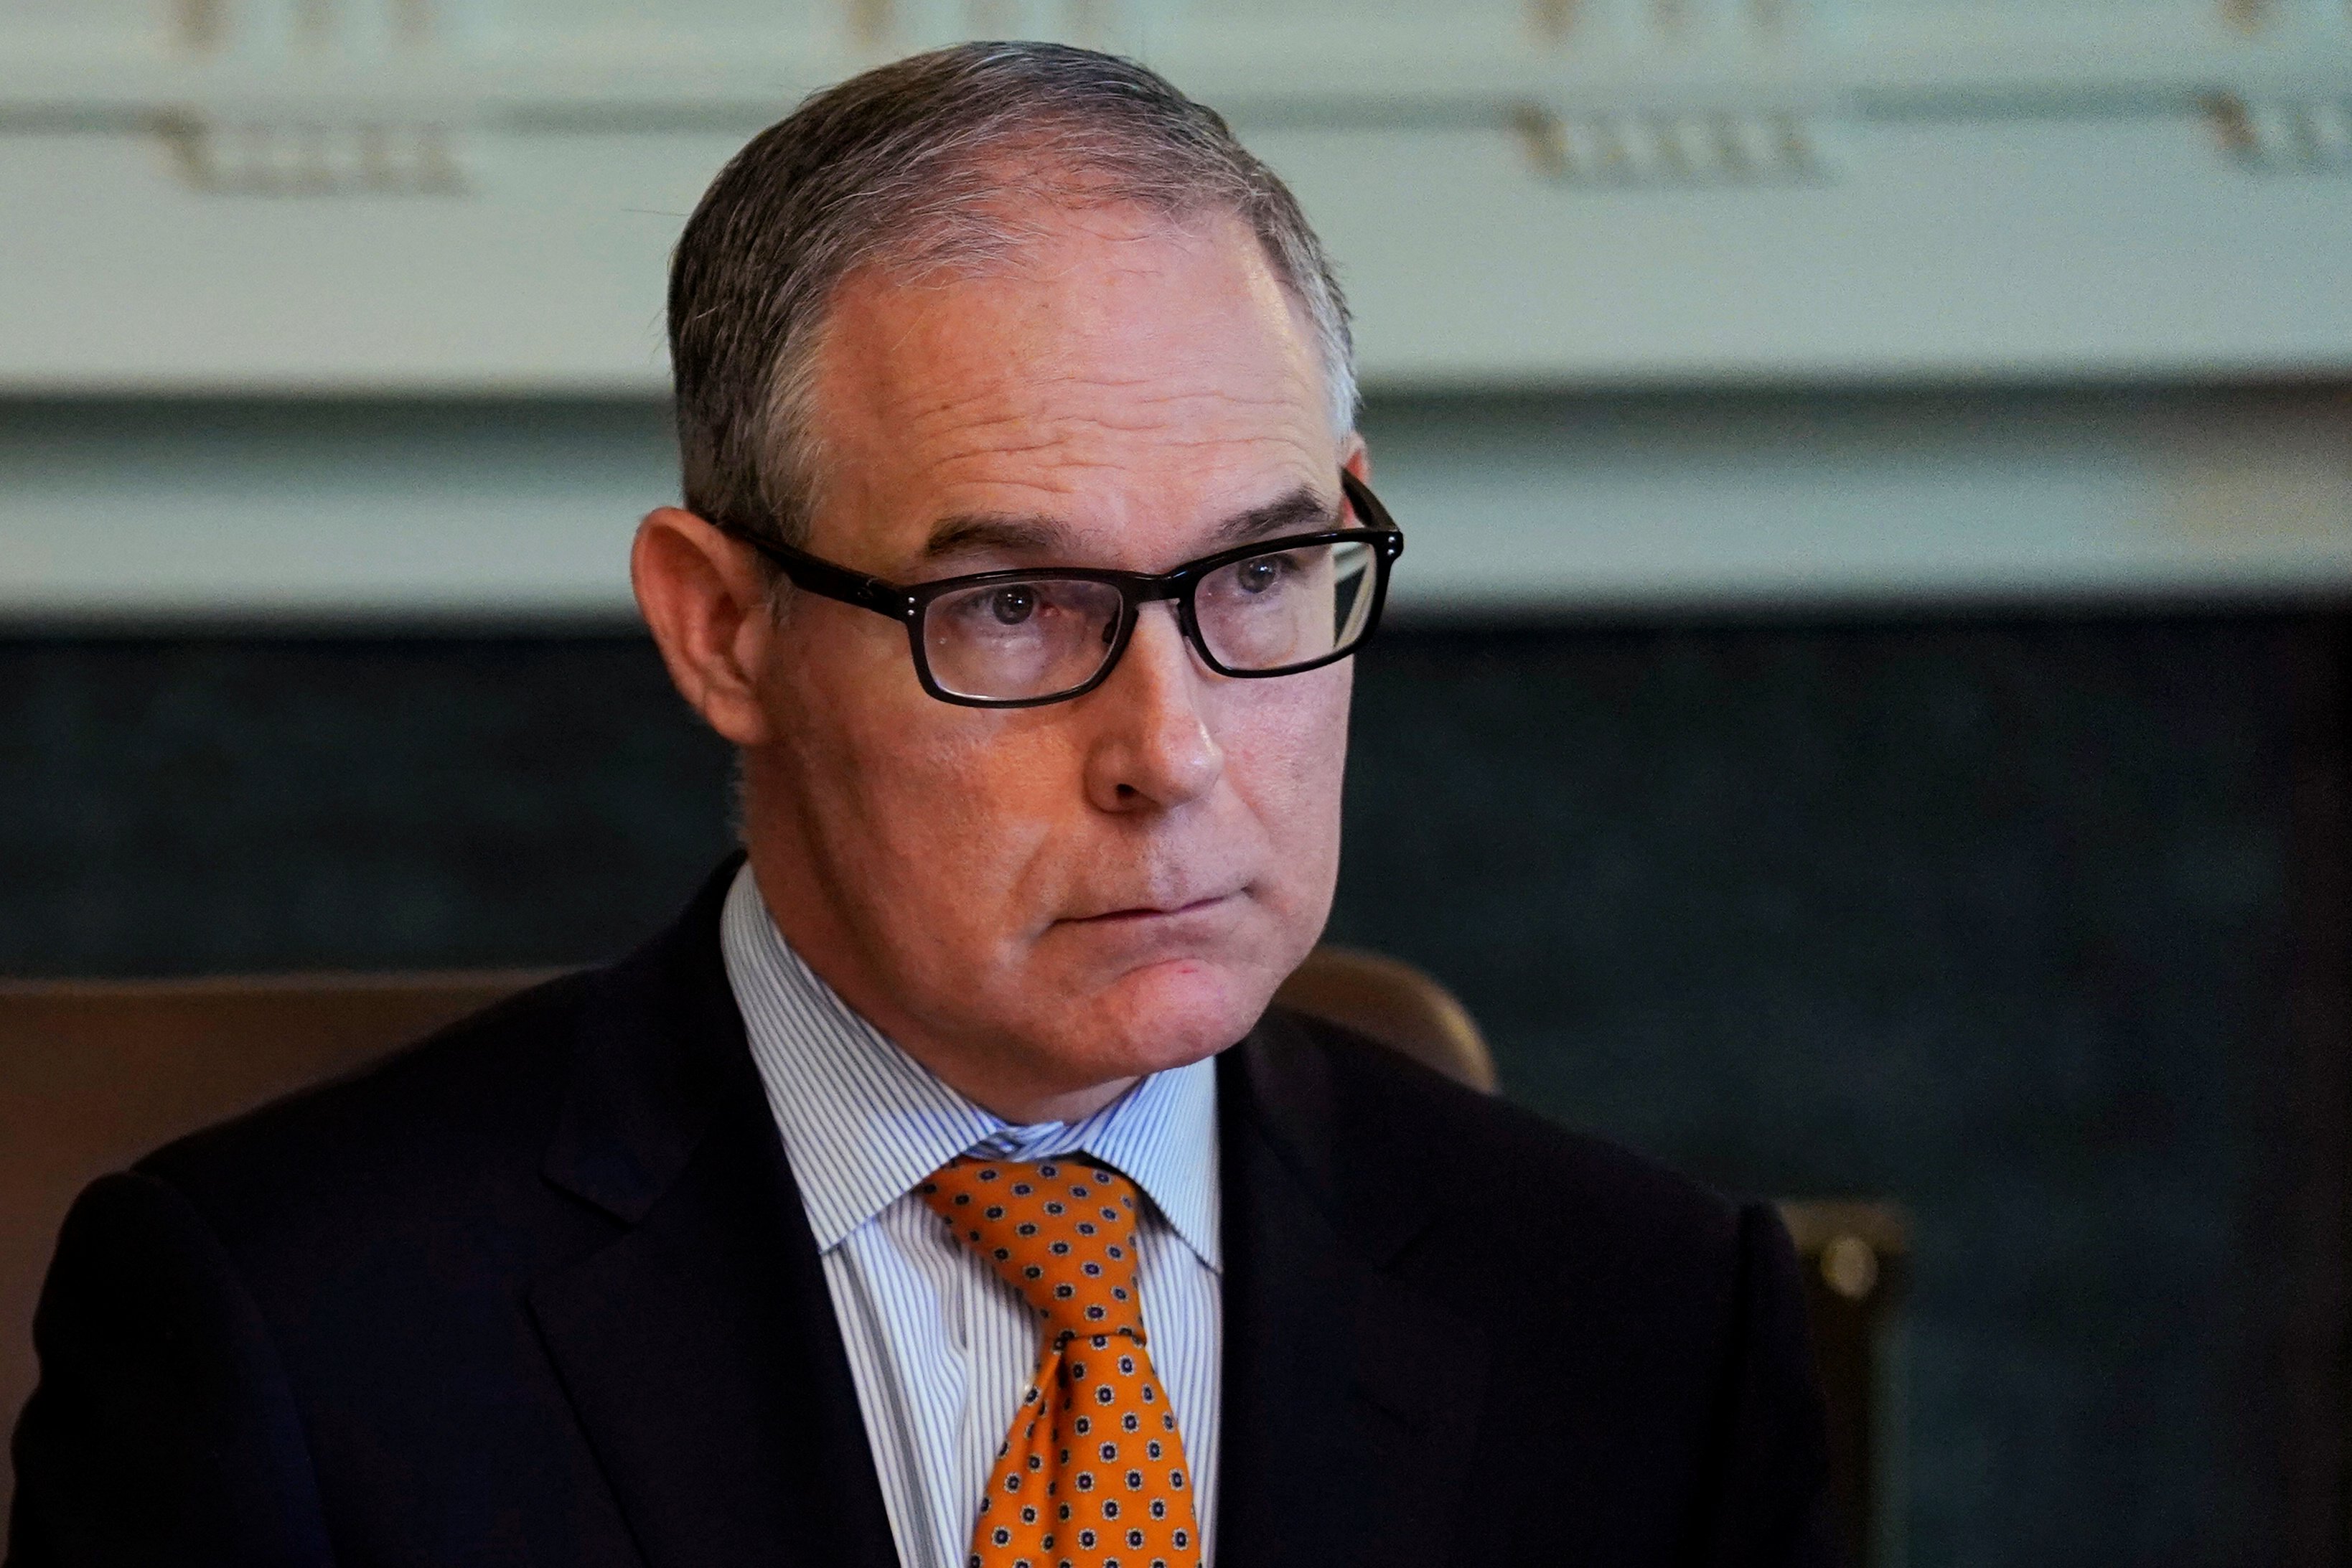 EPA Administrator Scott Pruitt listens during cabinet meeting at the White House in Washington